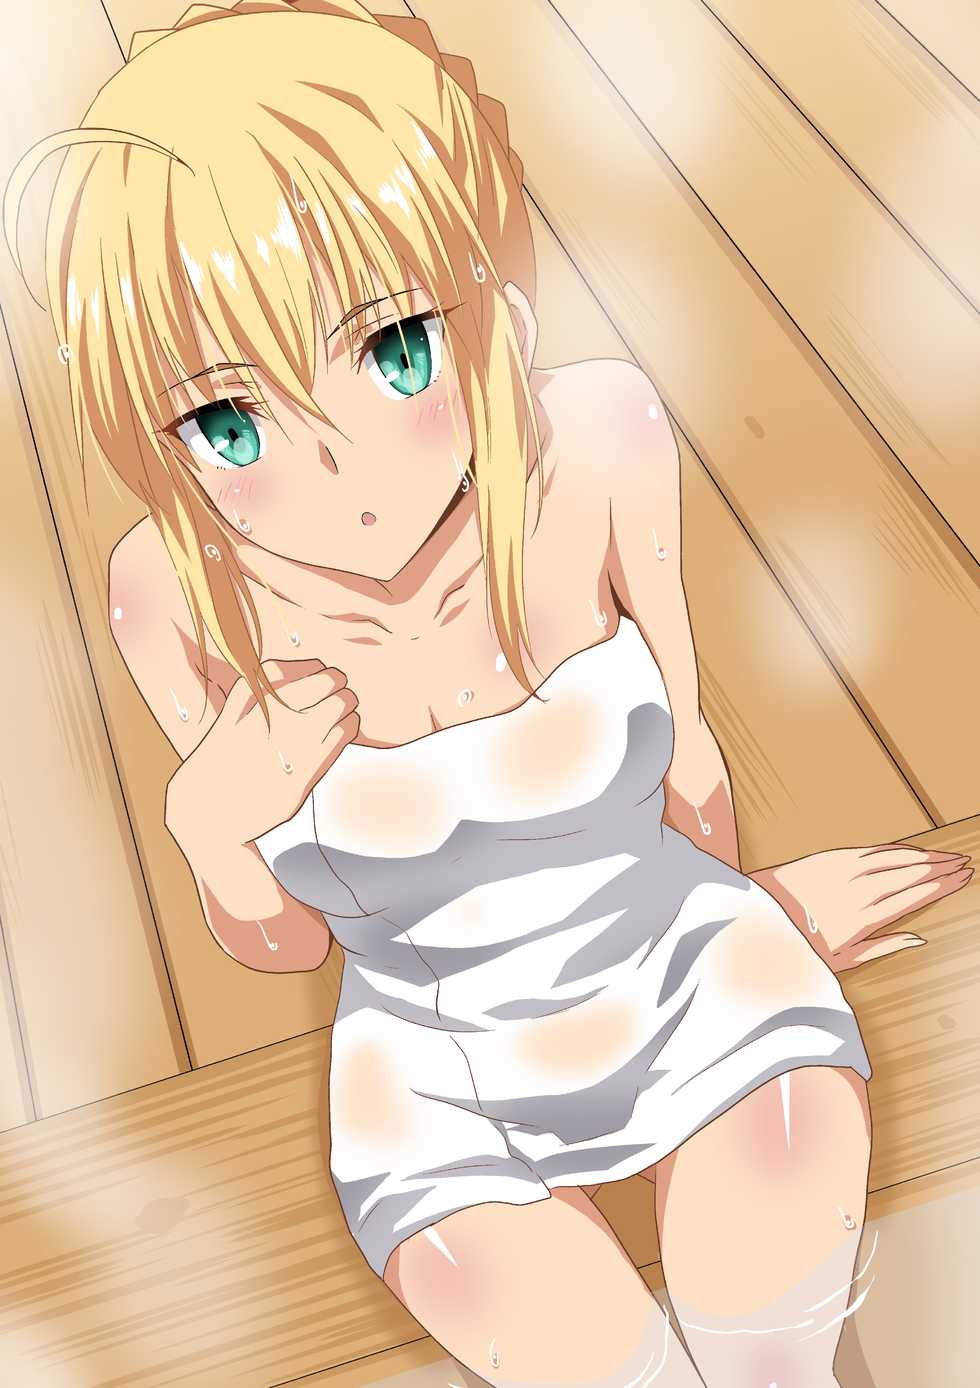 [Hara] Saber to Omake (Fate/stay night) - Page 8